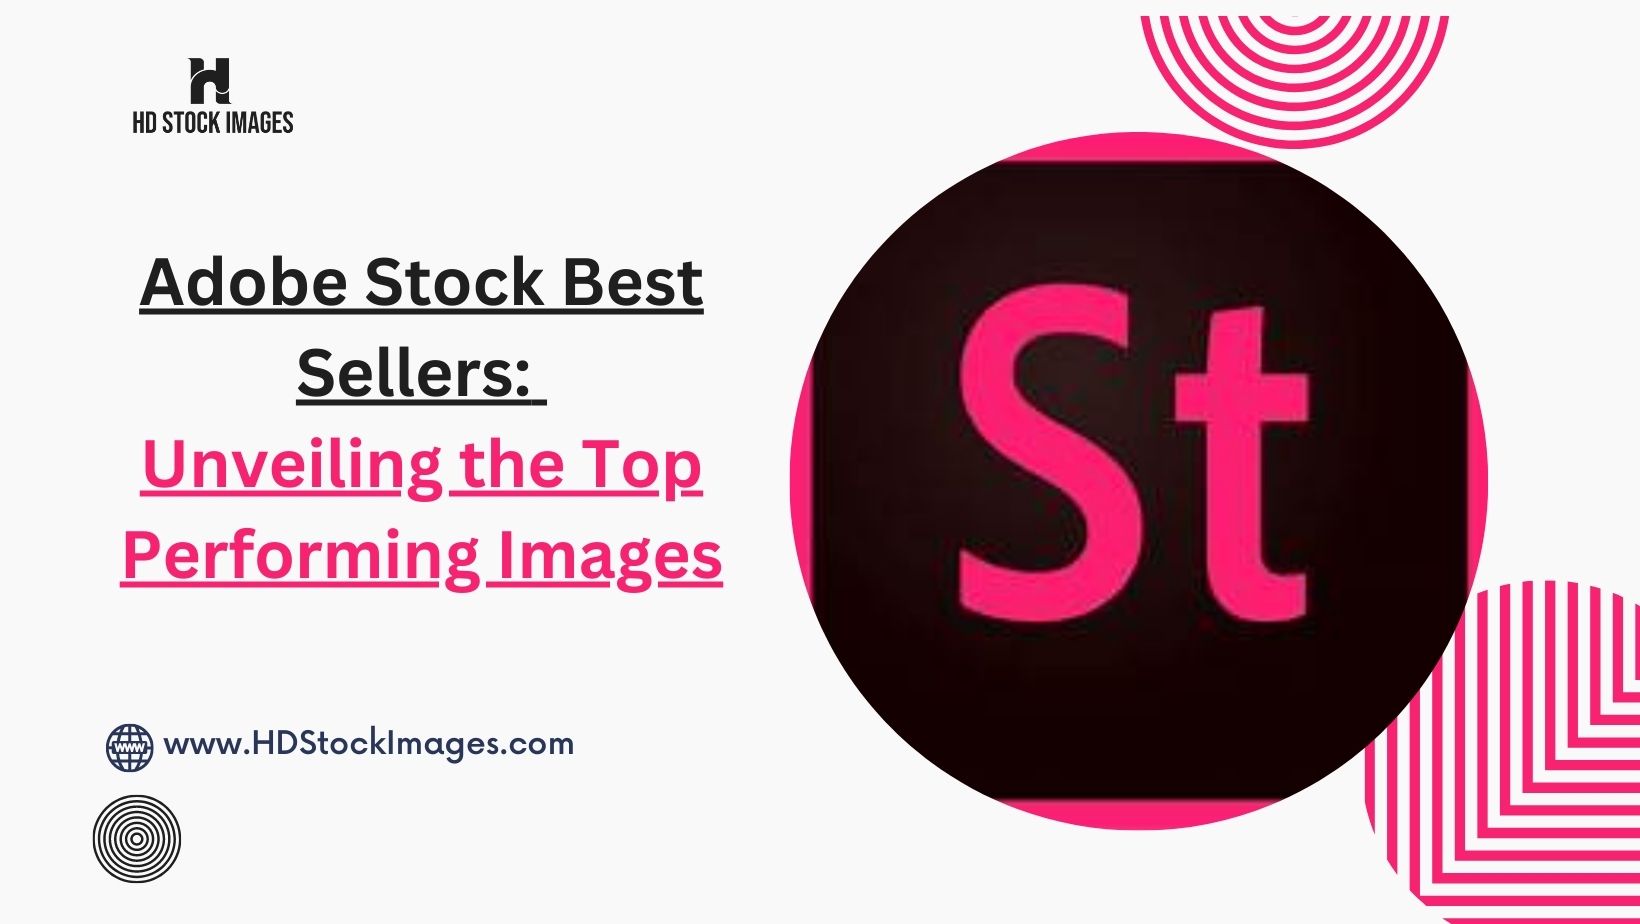 An image of Adobe Stock Best Sellers: Unveiling the Top Performing Images